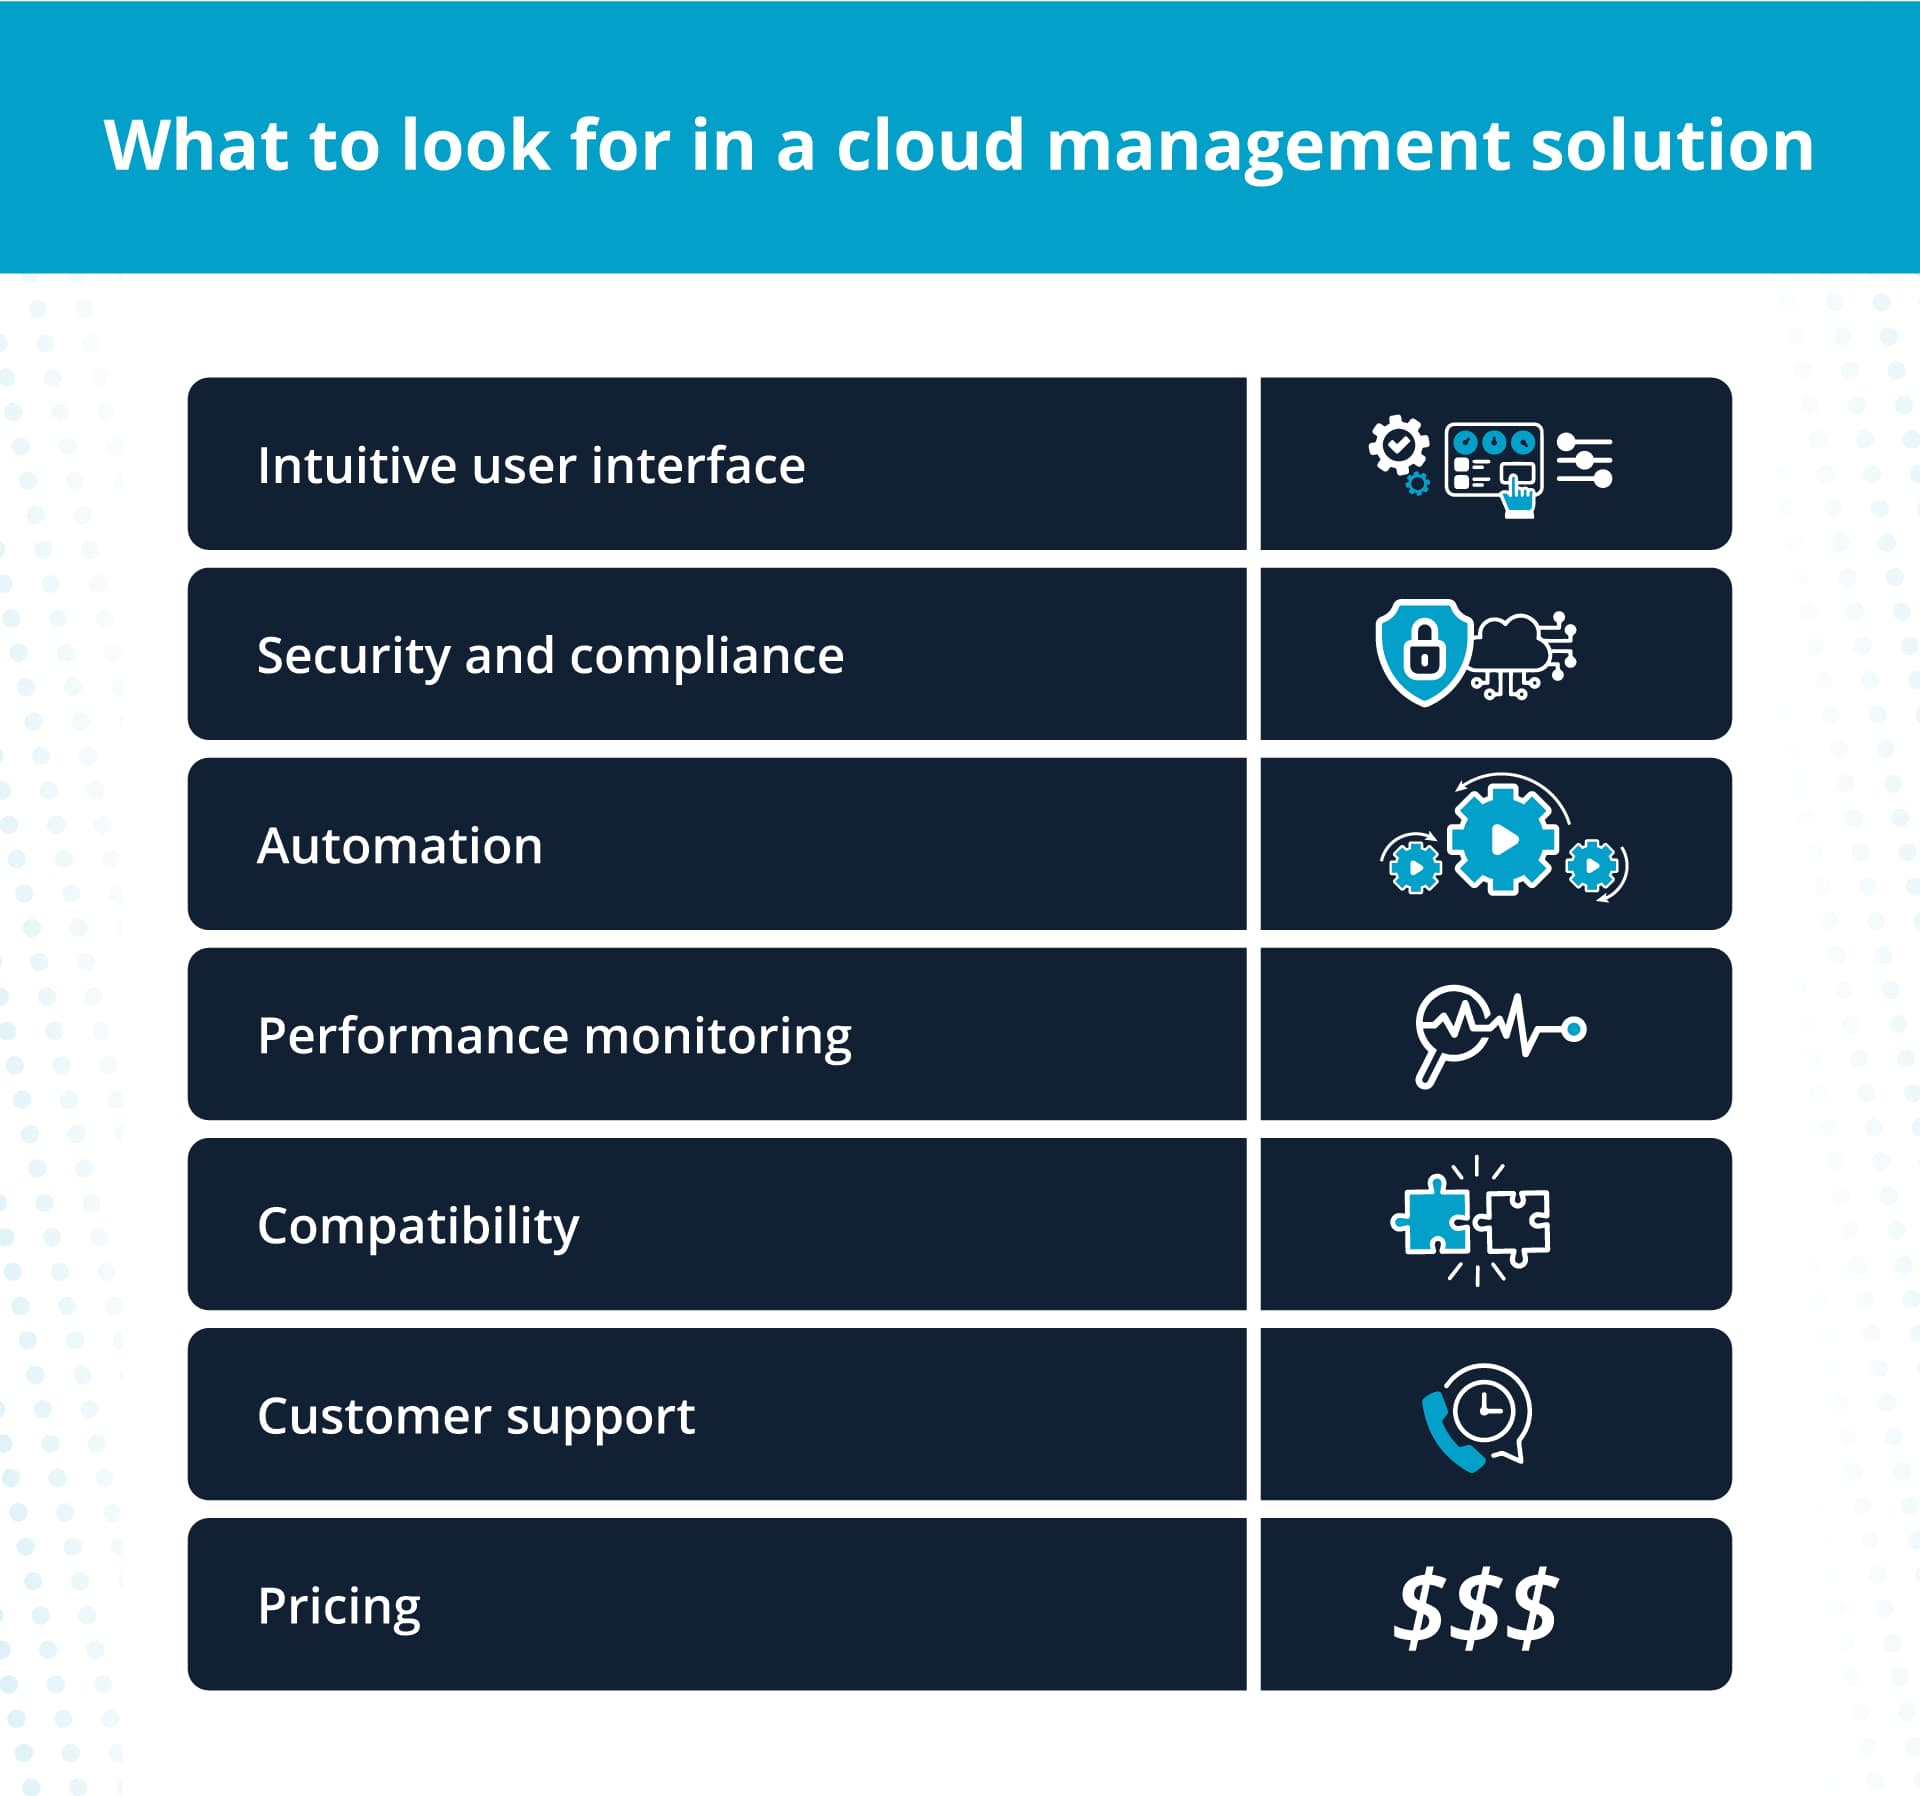 When choosing an enterprise cloud management platform, consider things like ease of use and compatibility.